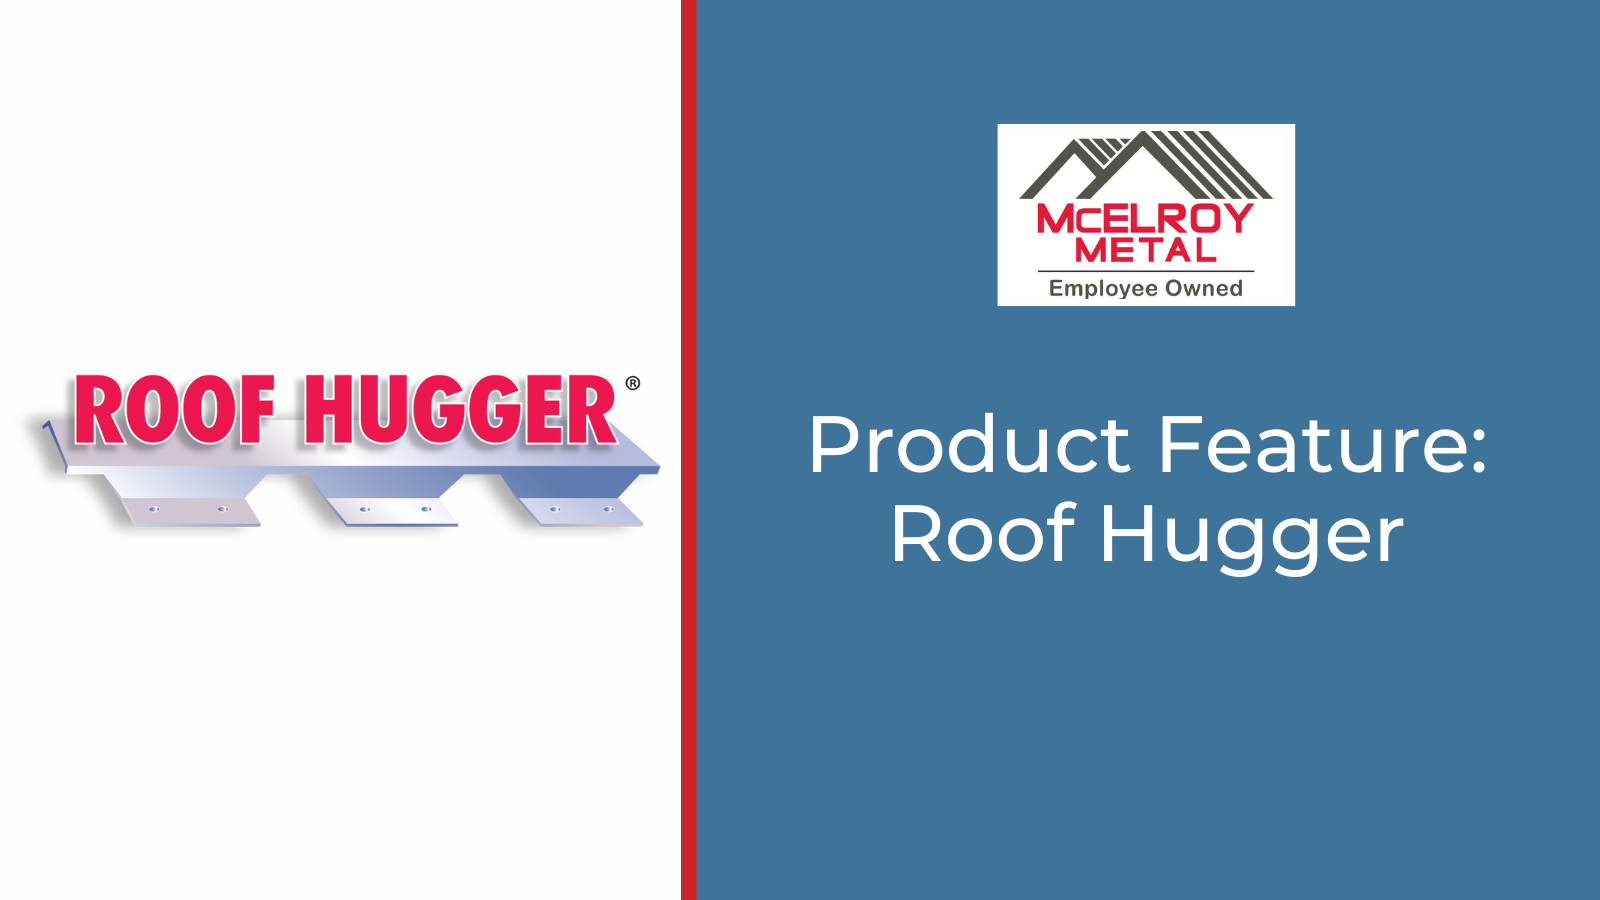 Product Feature: Roof Hugger